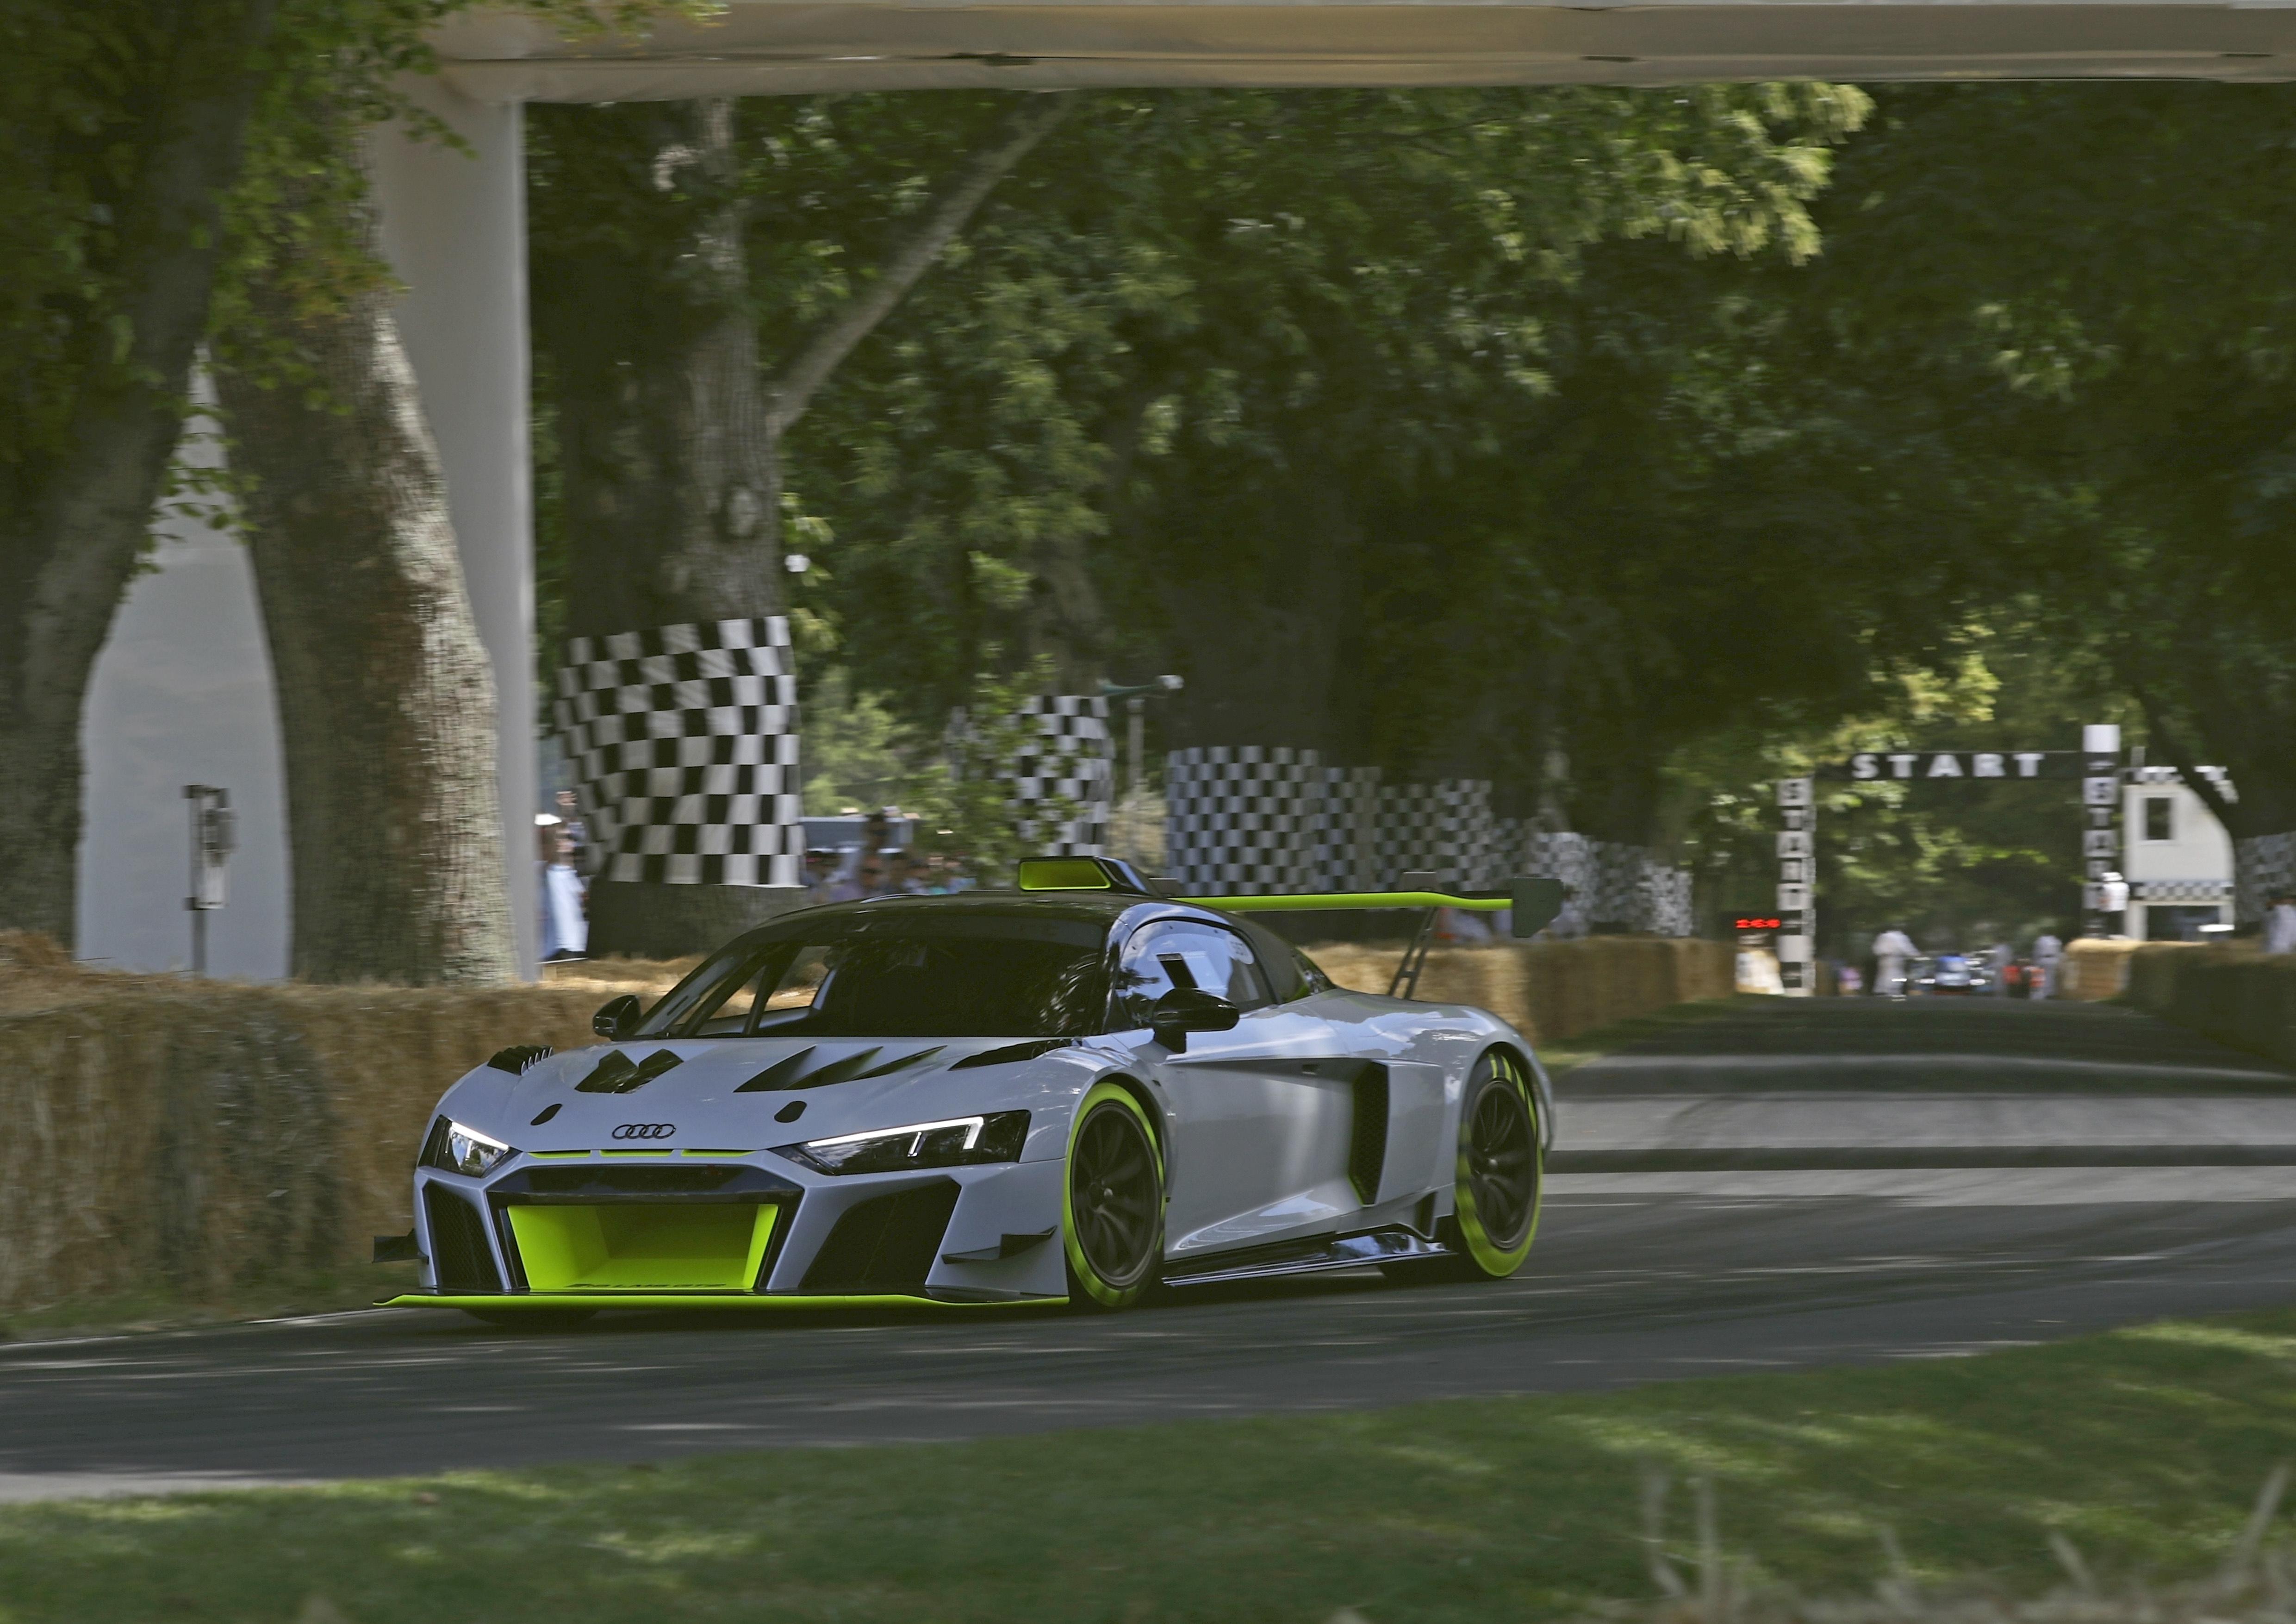 The 2020 Audi R8 LMS GT2 Is The R8 We Deserve For The Road